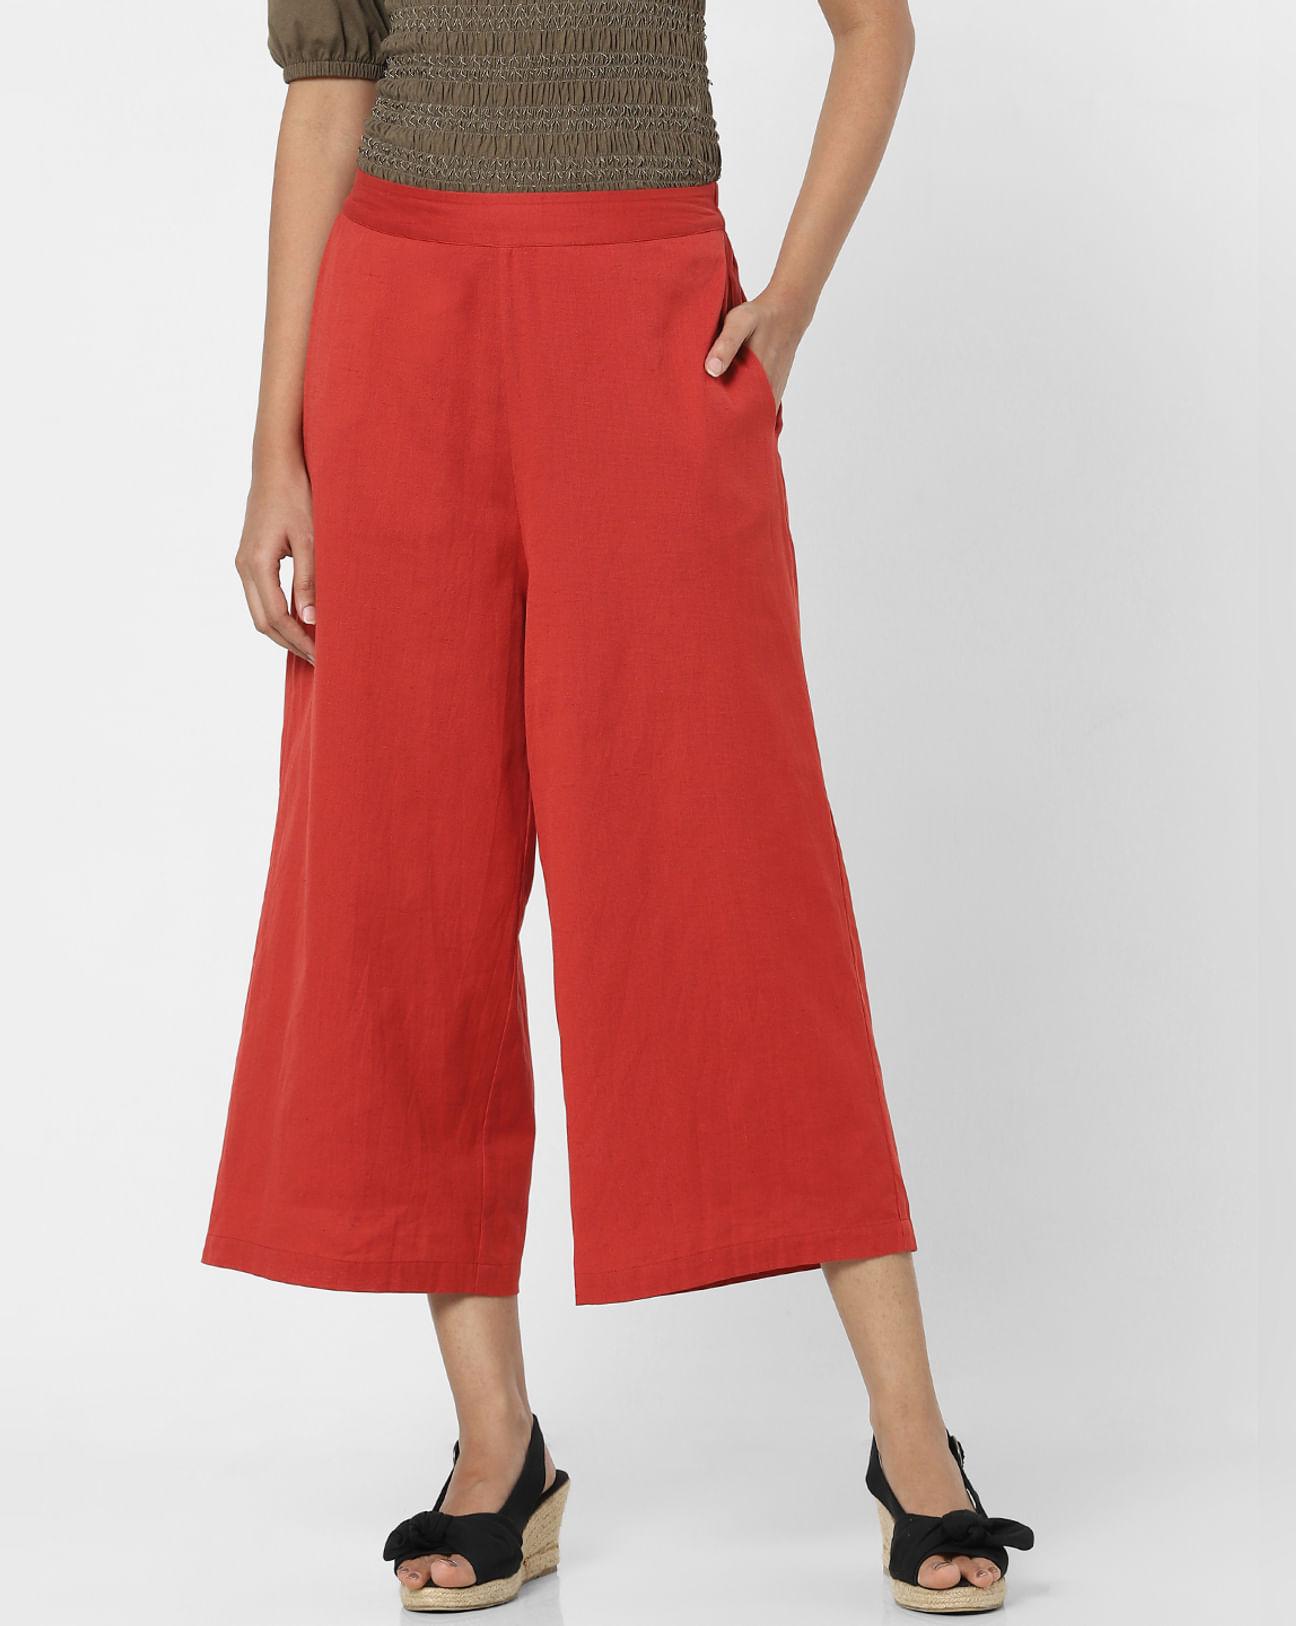 red mid rise pants